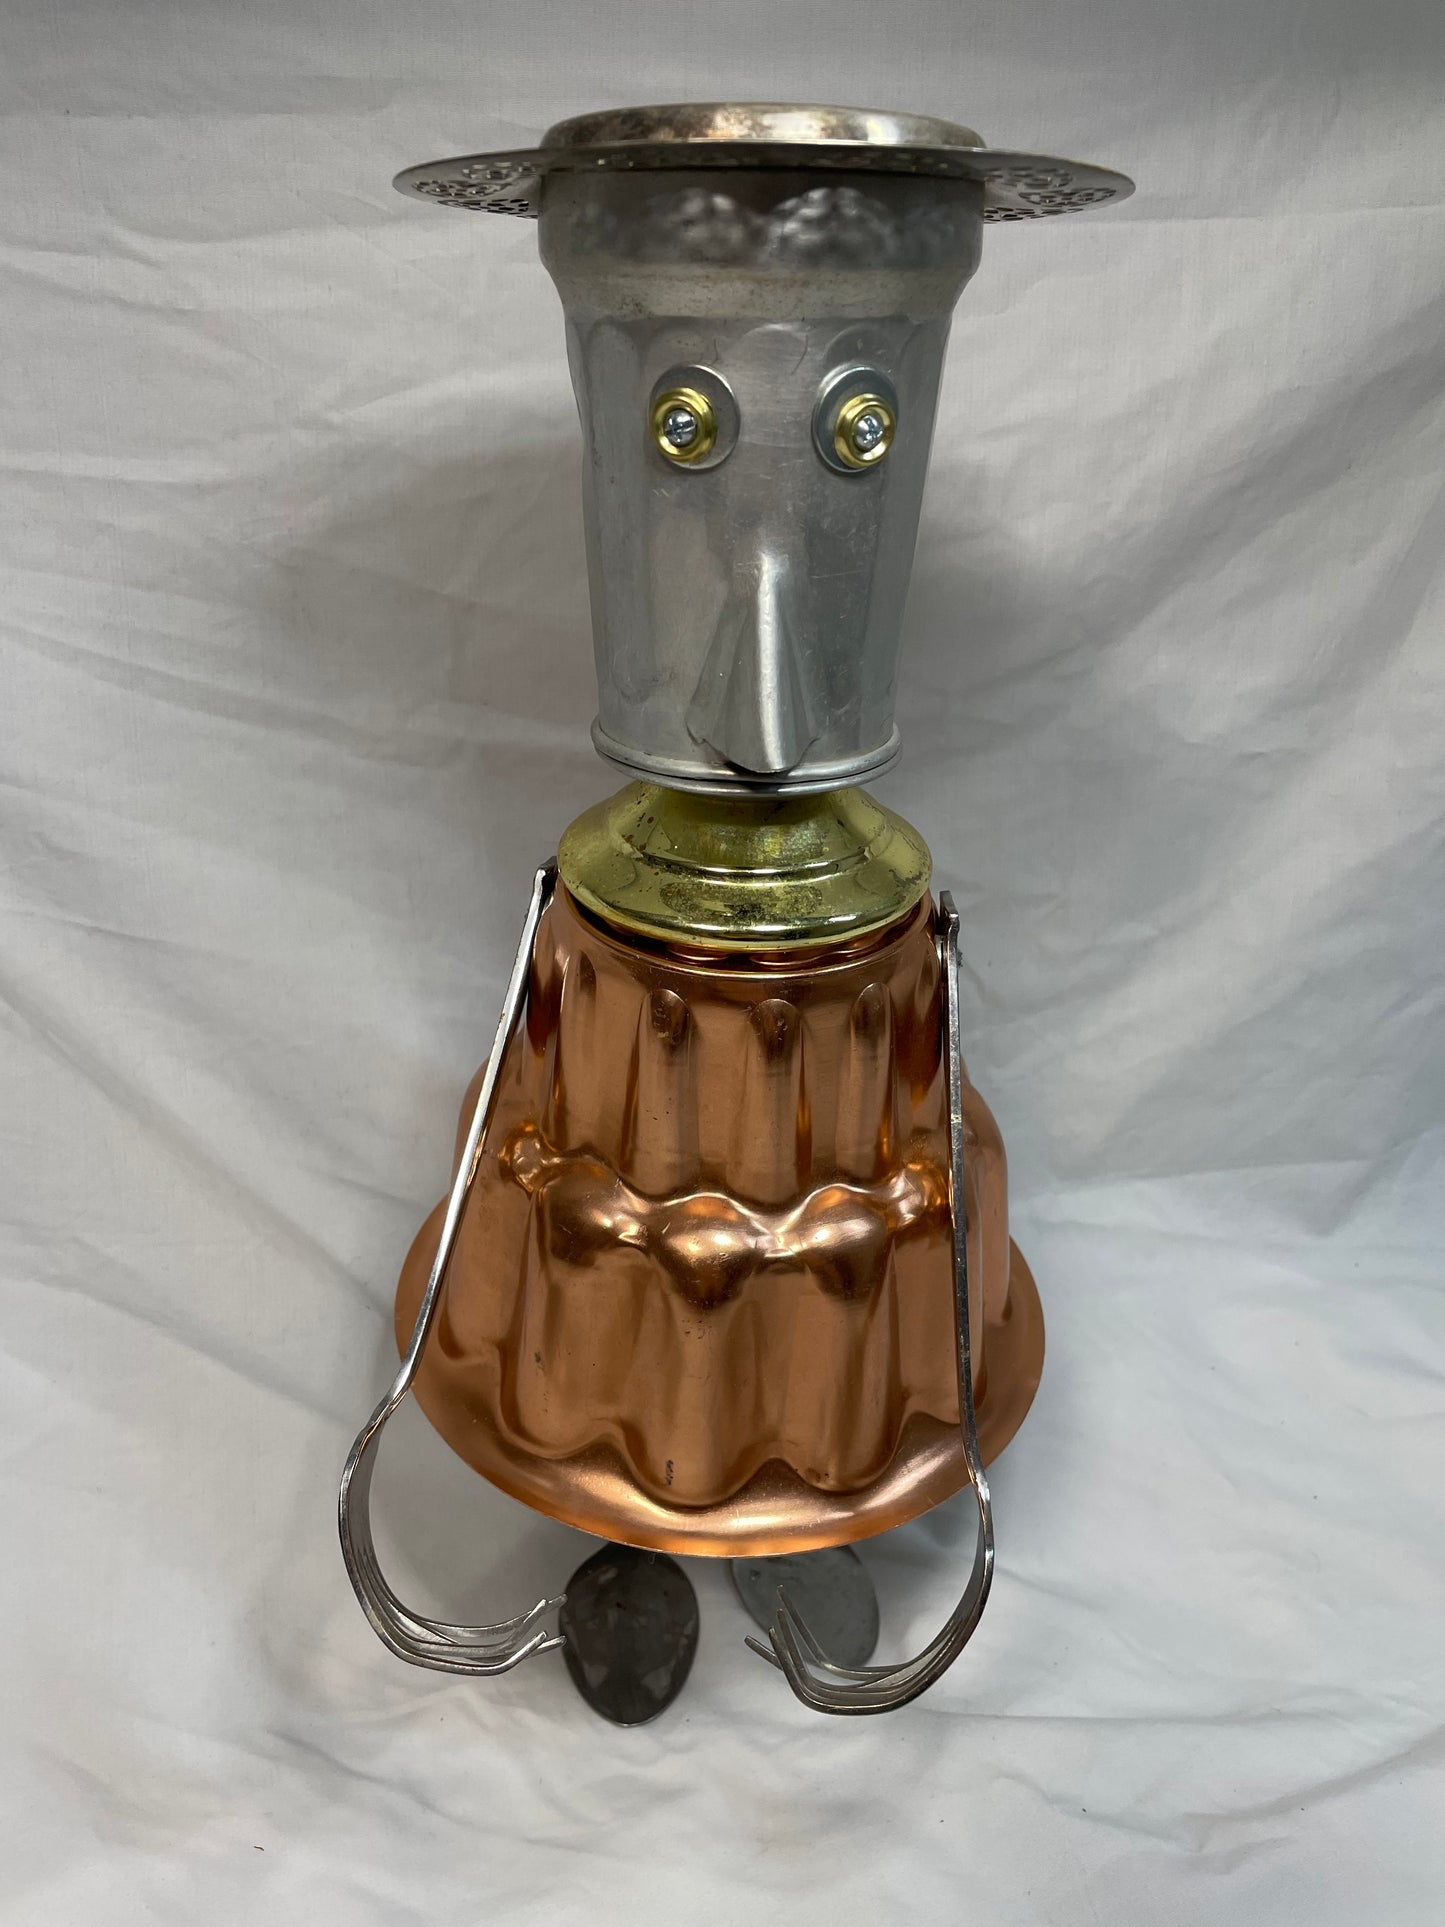 “Old Man Bill” Recycled Robot